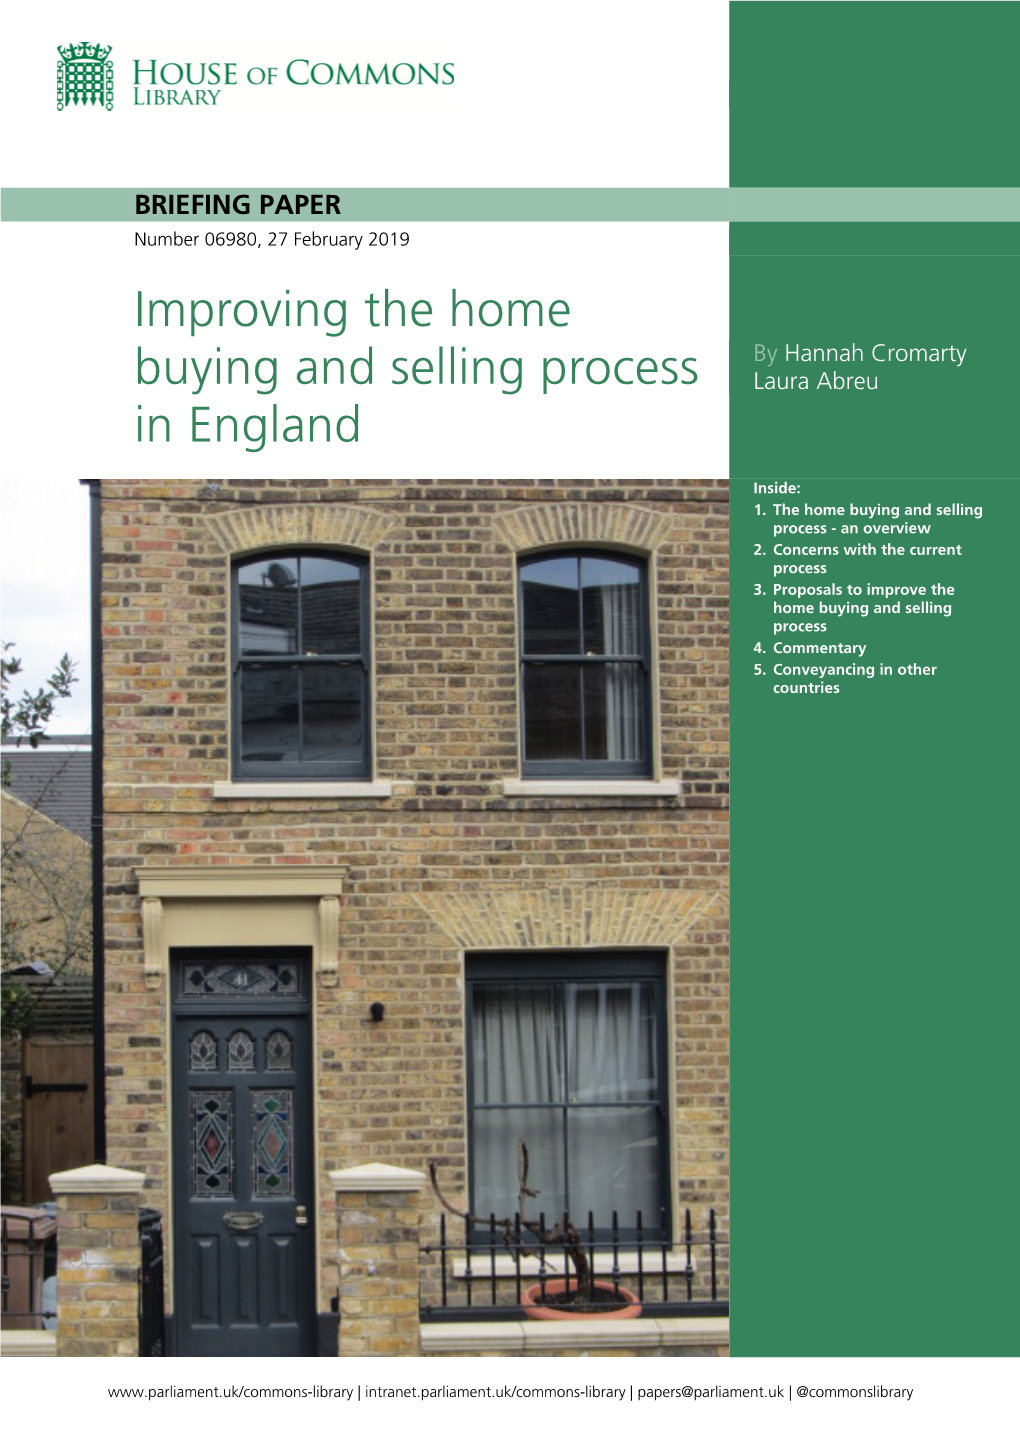 Improving the Home Buying and Selling Process in England